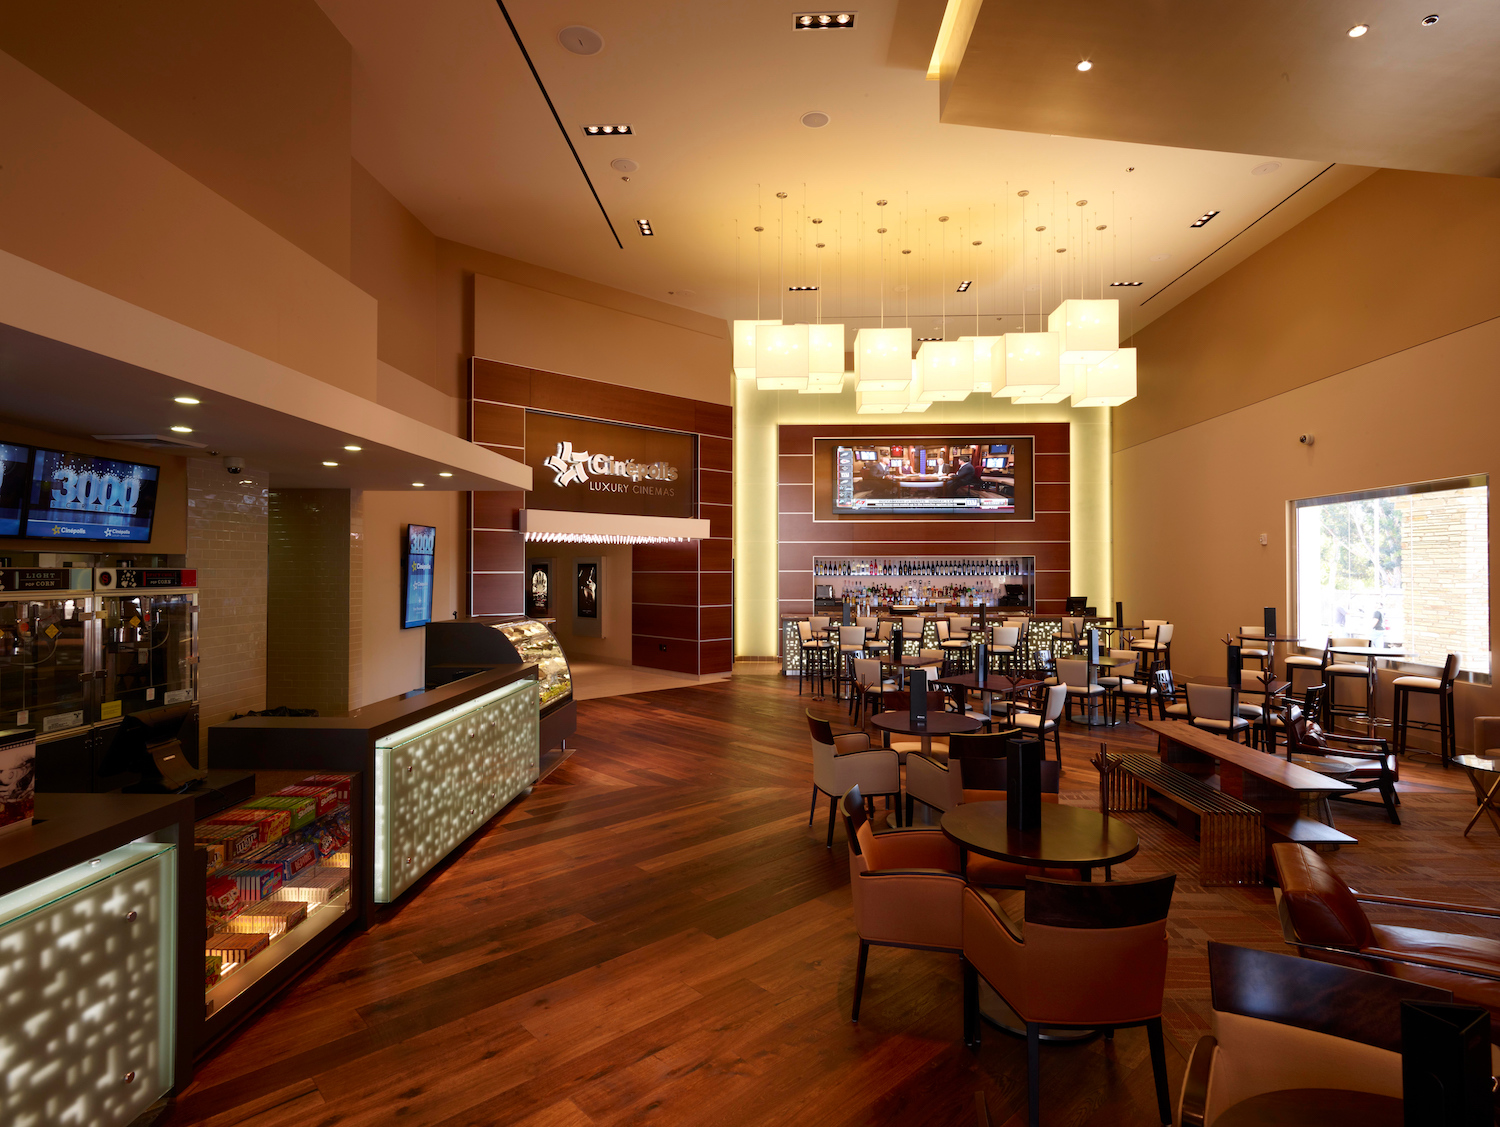 The luxury theaters come with a full bar, and almost every theater has a coffee bar.